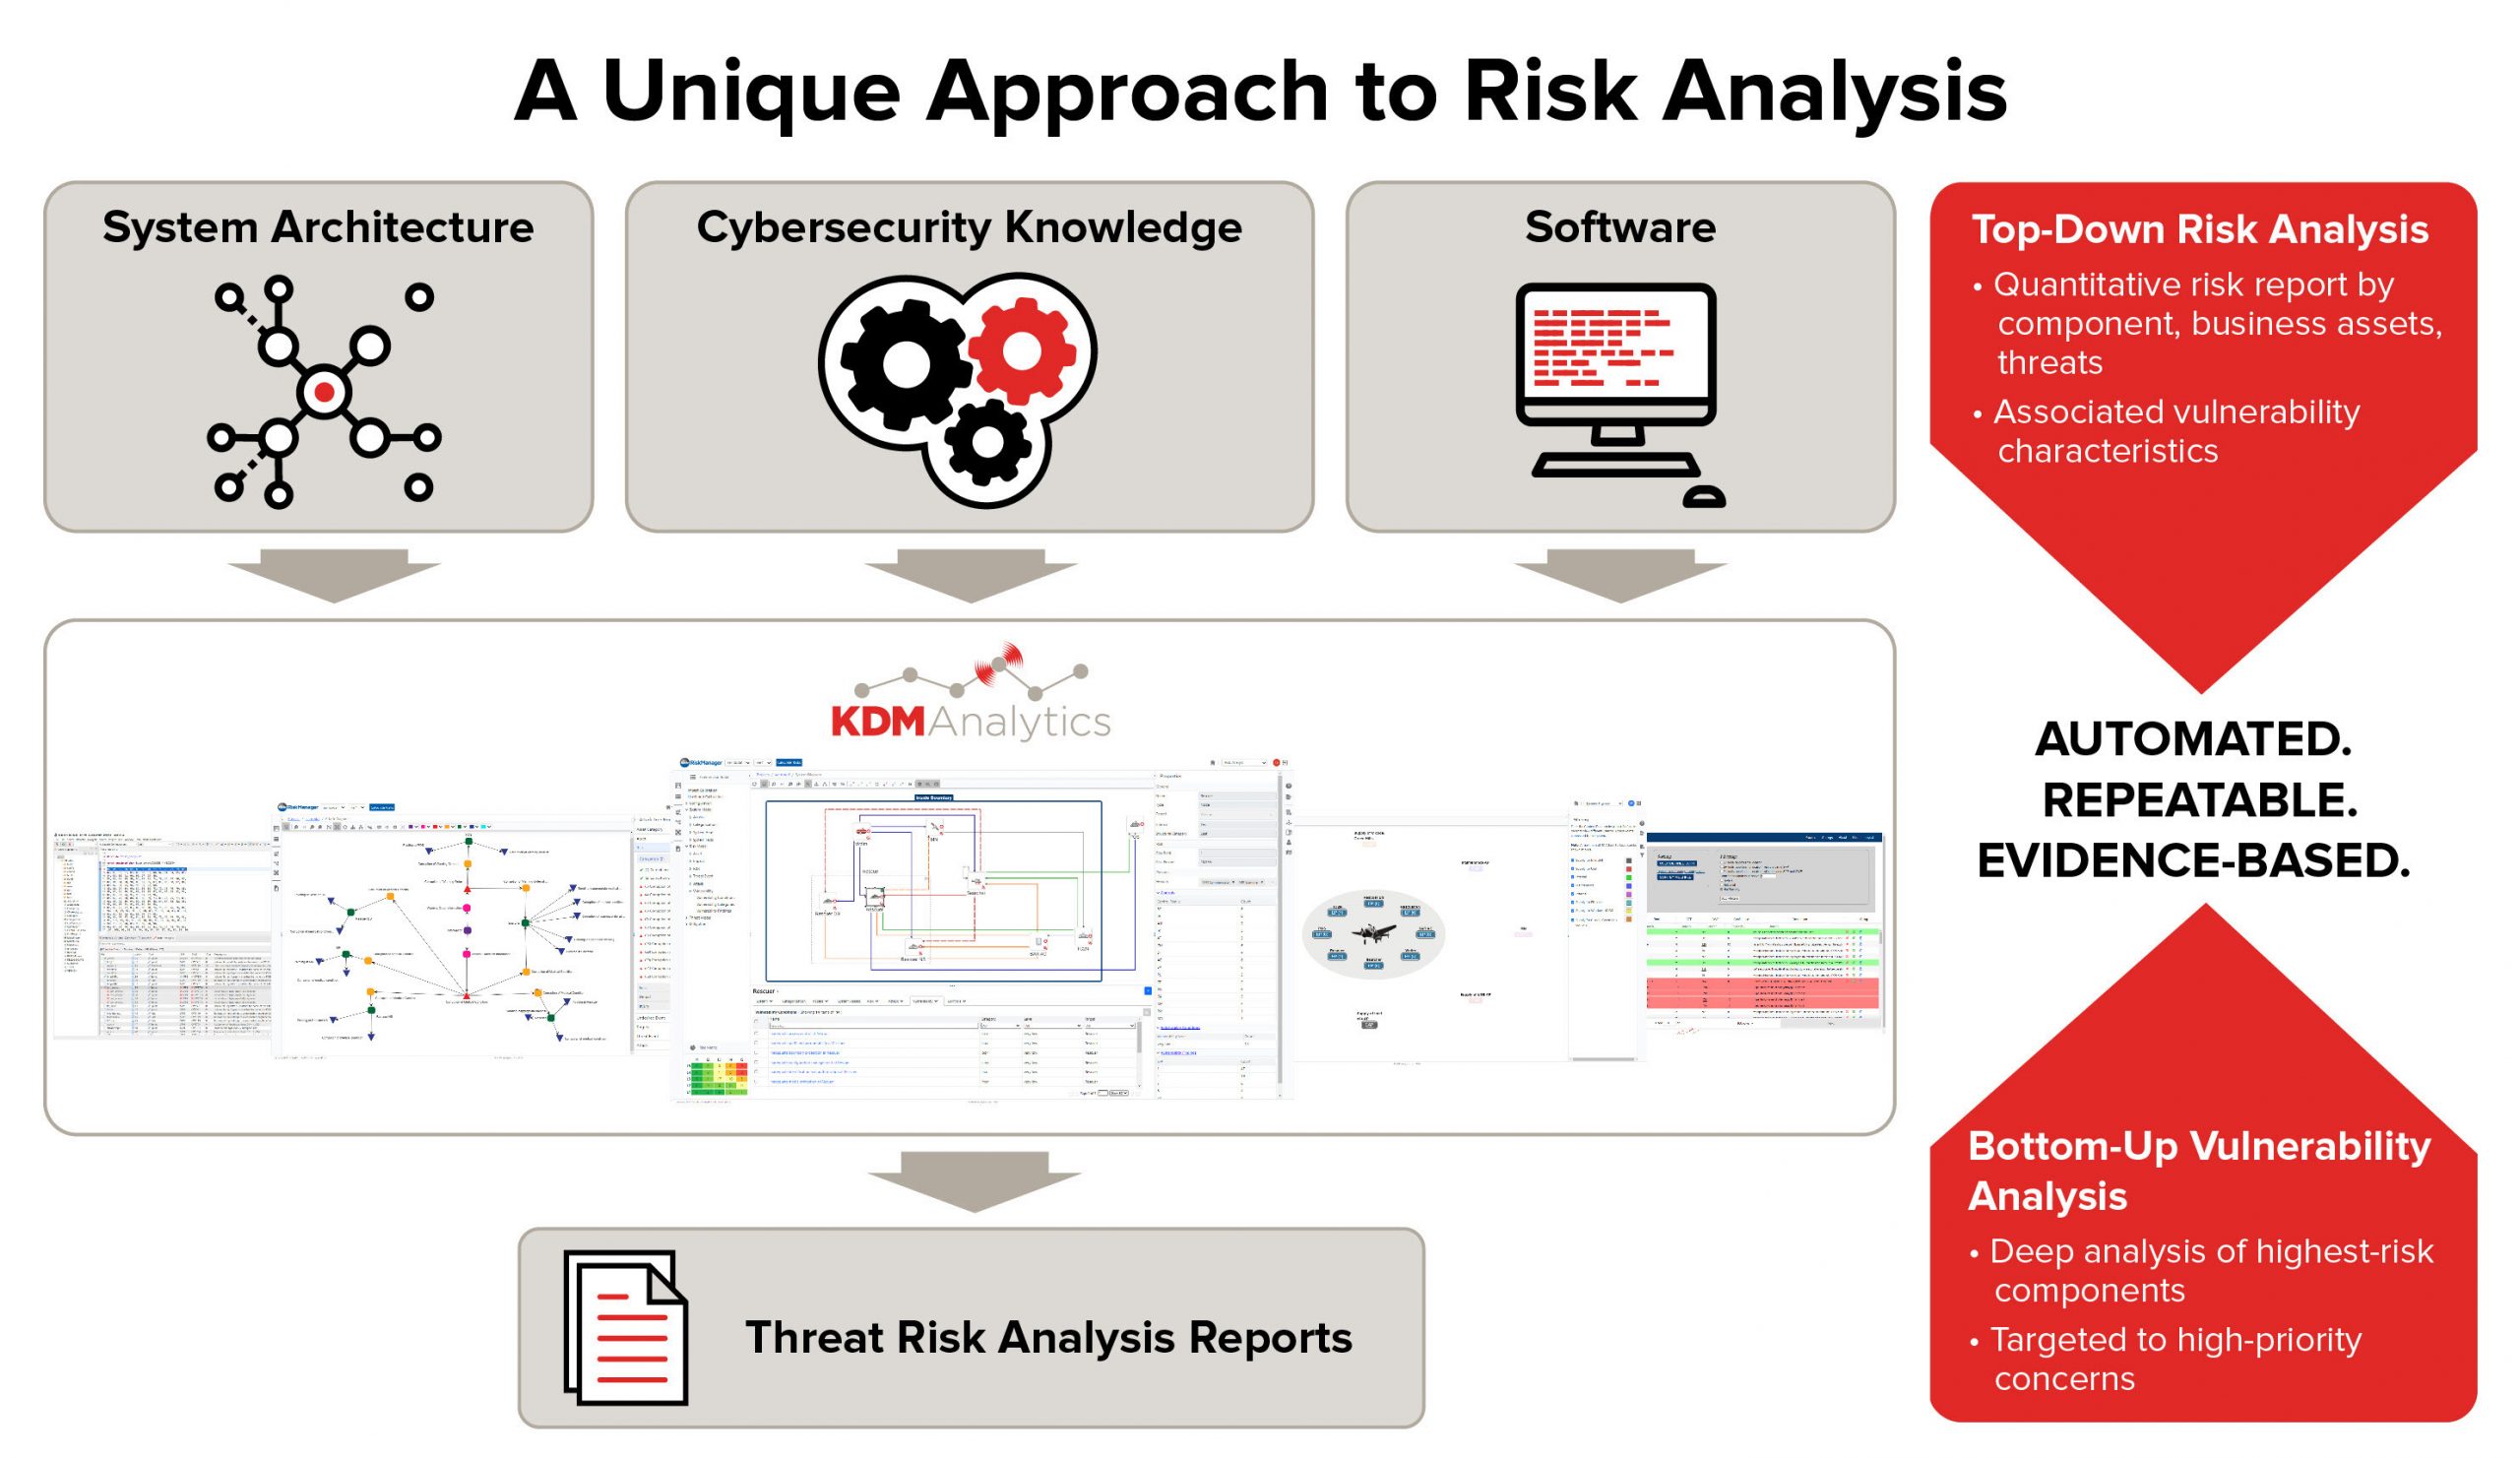 KDM Analytics has a unique approach to cyber risk analysis